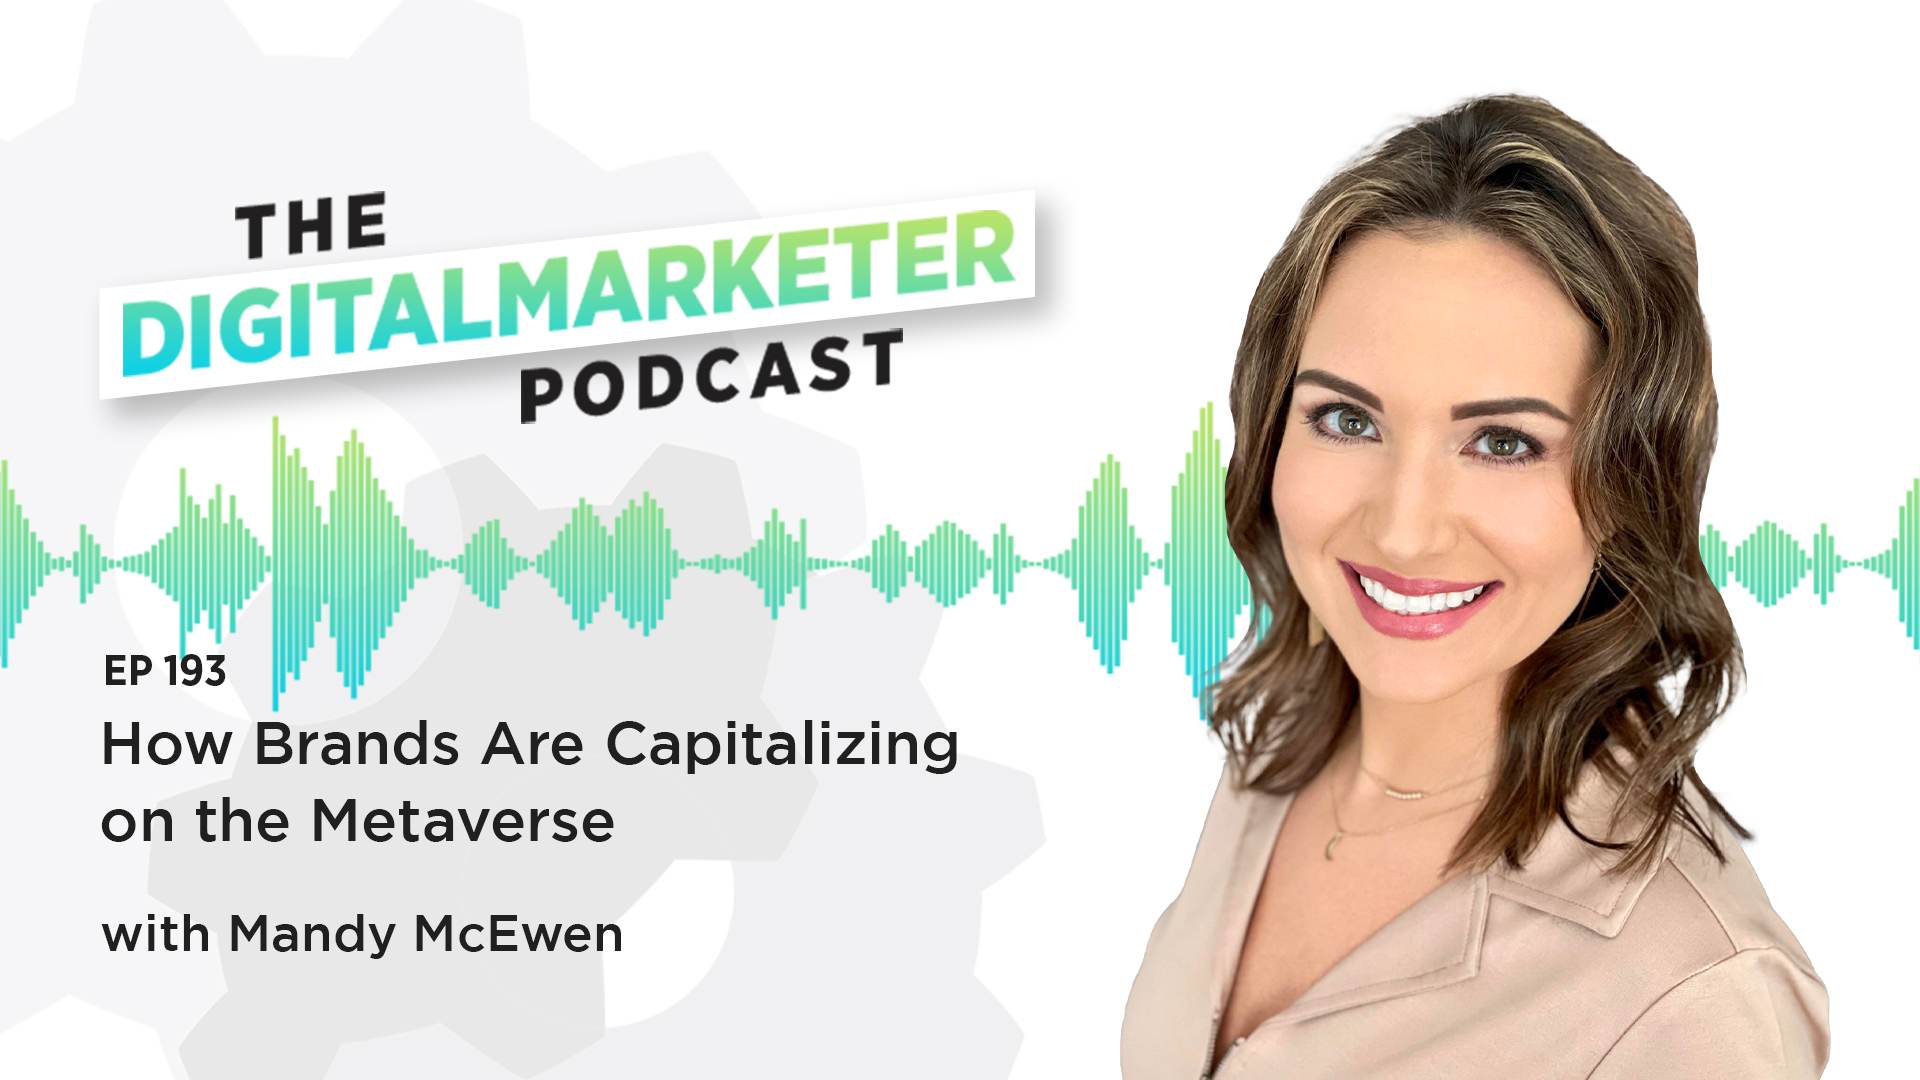 How Brands Are Capitalizing on the Metaverse with Mandy McEwen